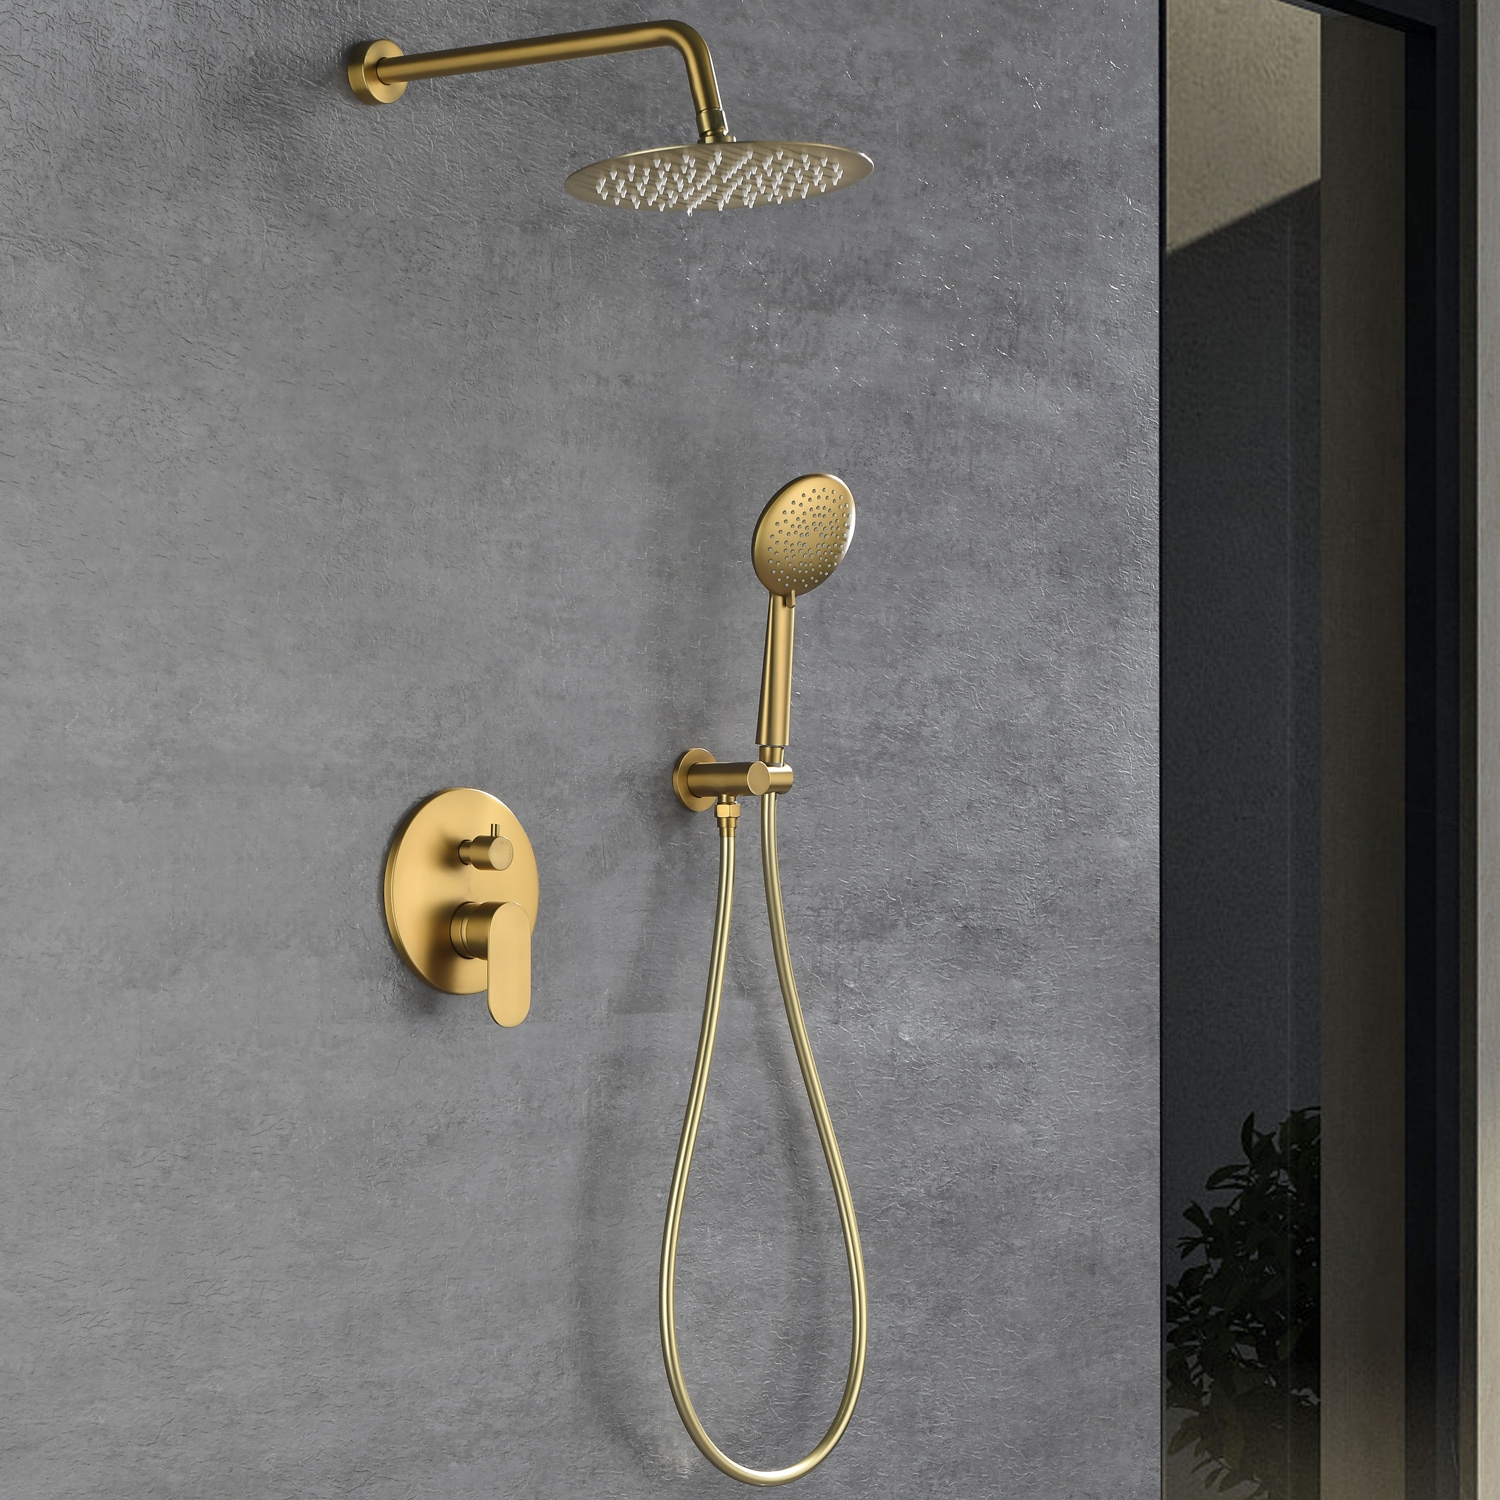 Pouuin Ob Brushed Gold Waterfall Built-In Shower Faucet System with 2-way Diverter Valve Included